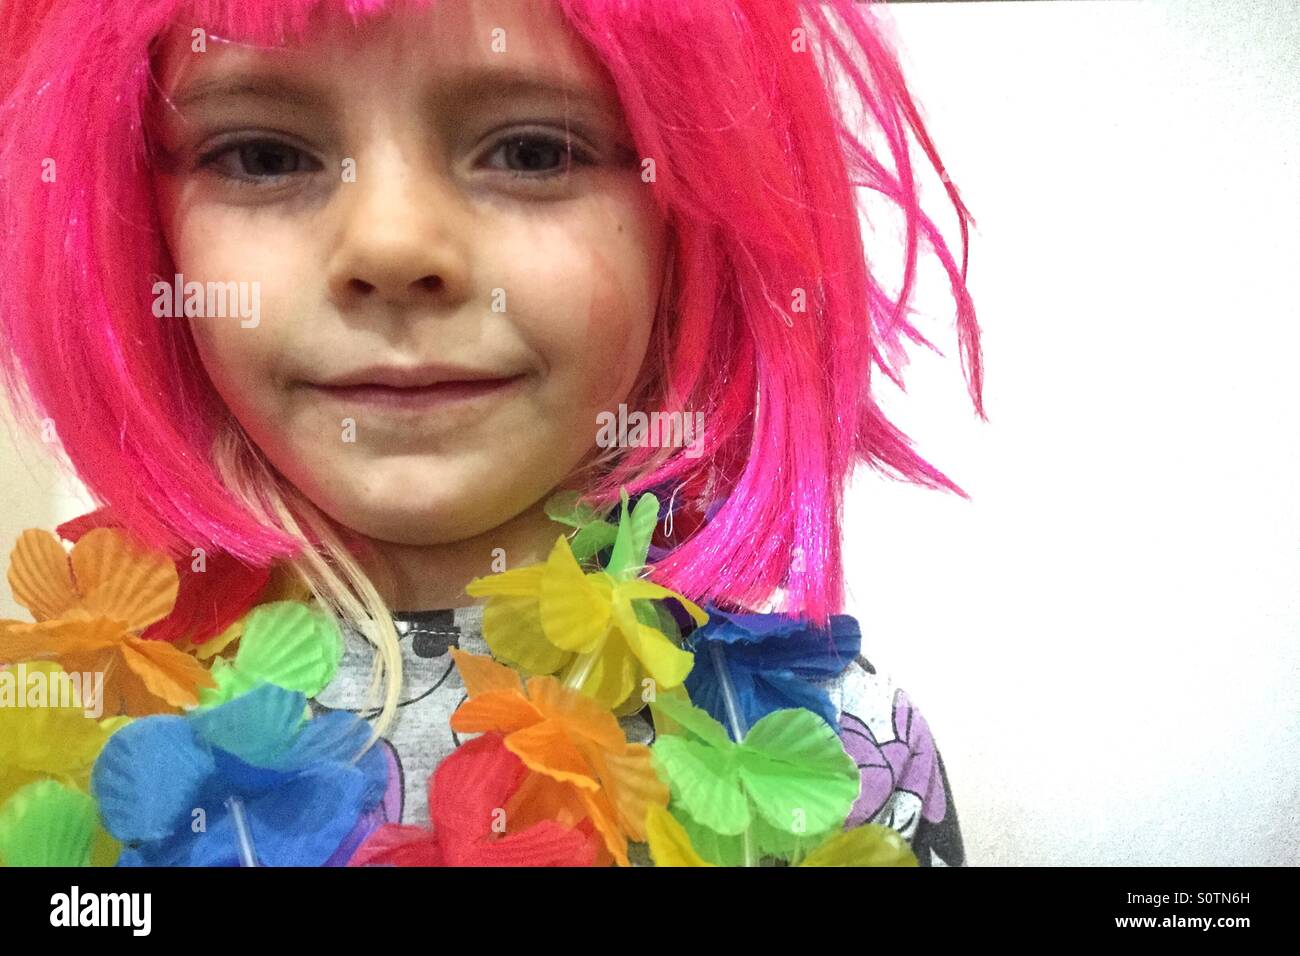 Girl in a pink wig Stock Photo